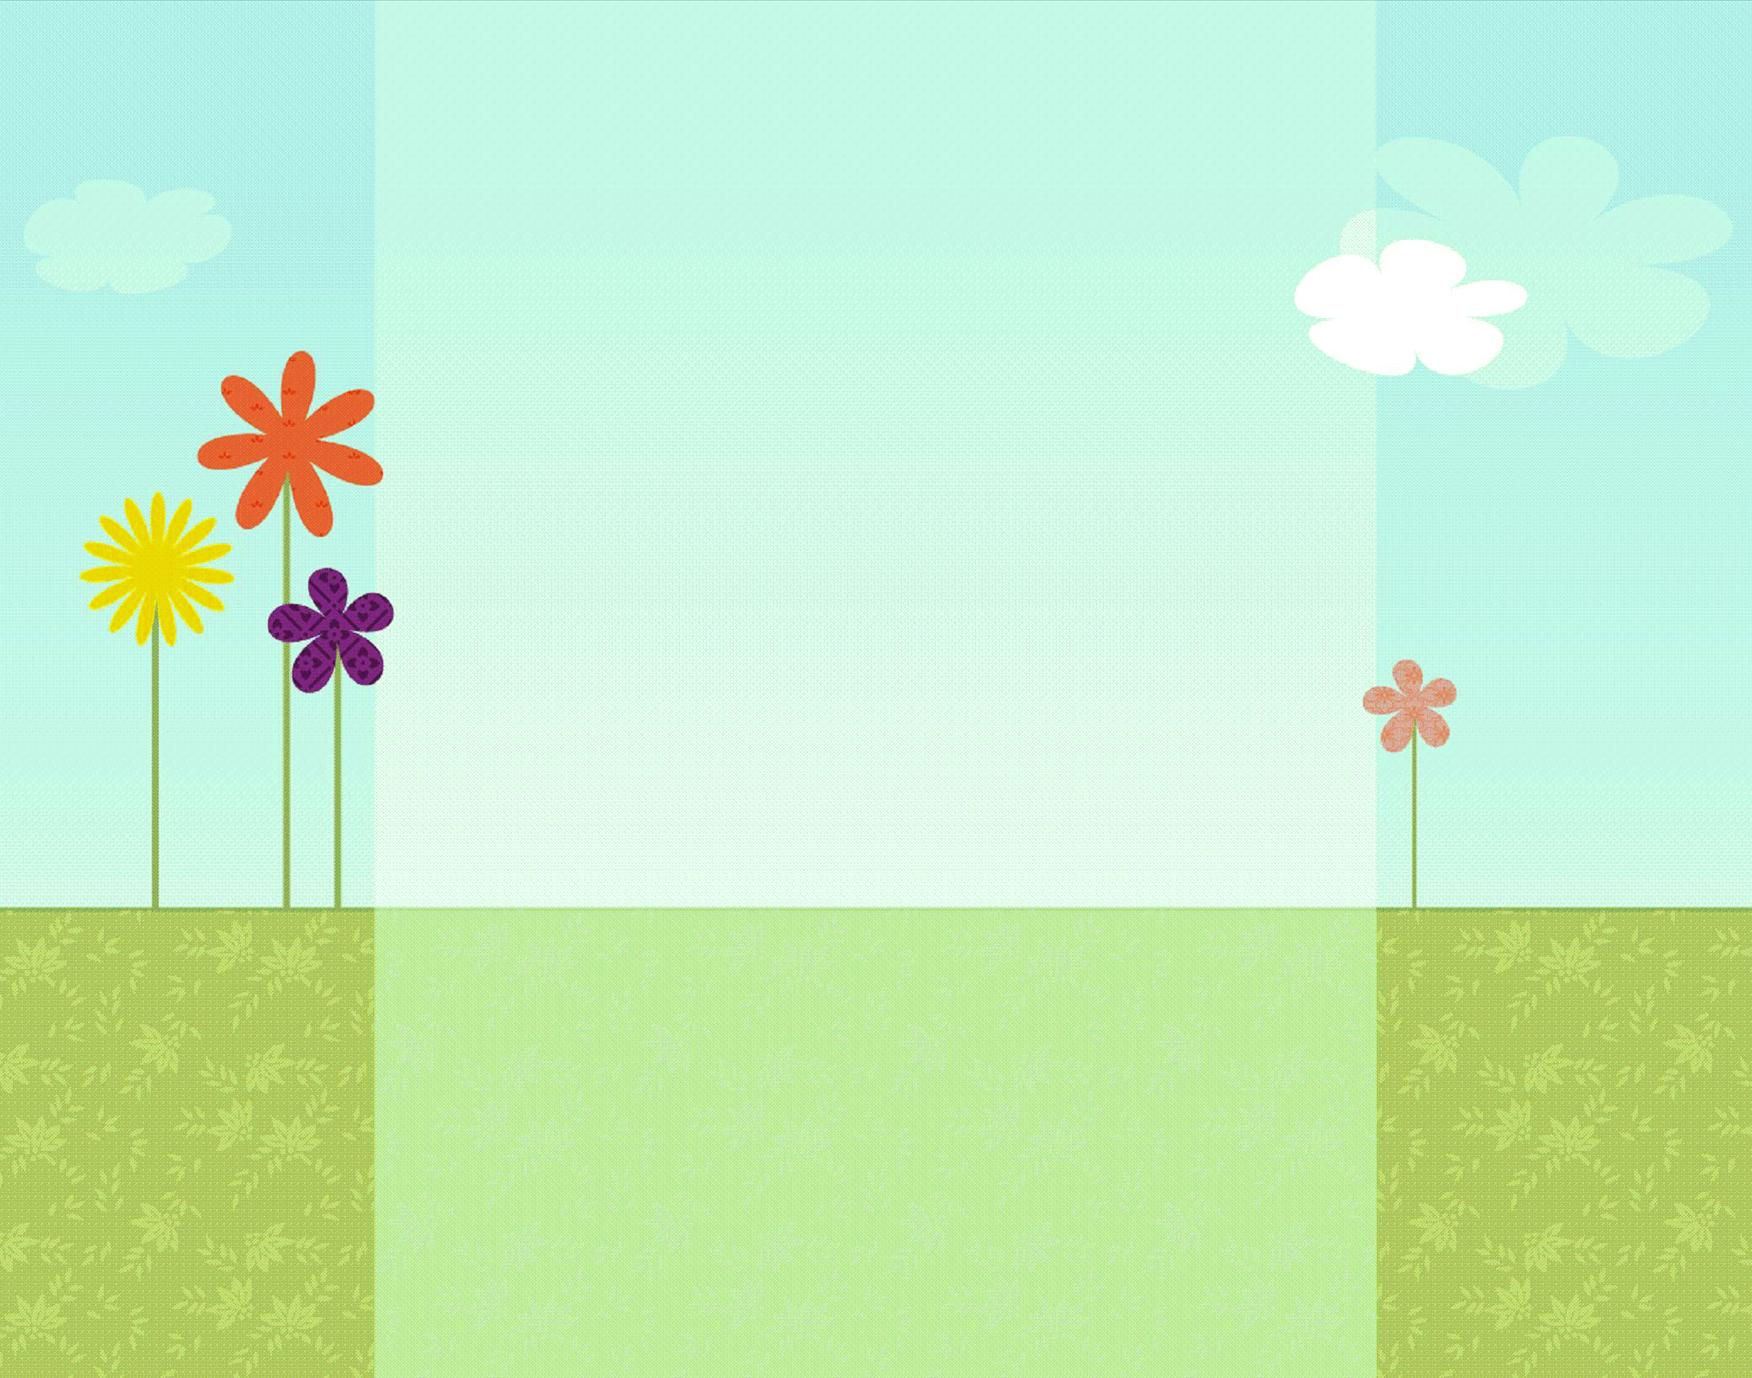 Sunshine and Flowers Backgrounds powerpoint backgrounds